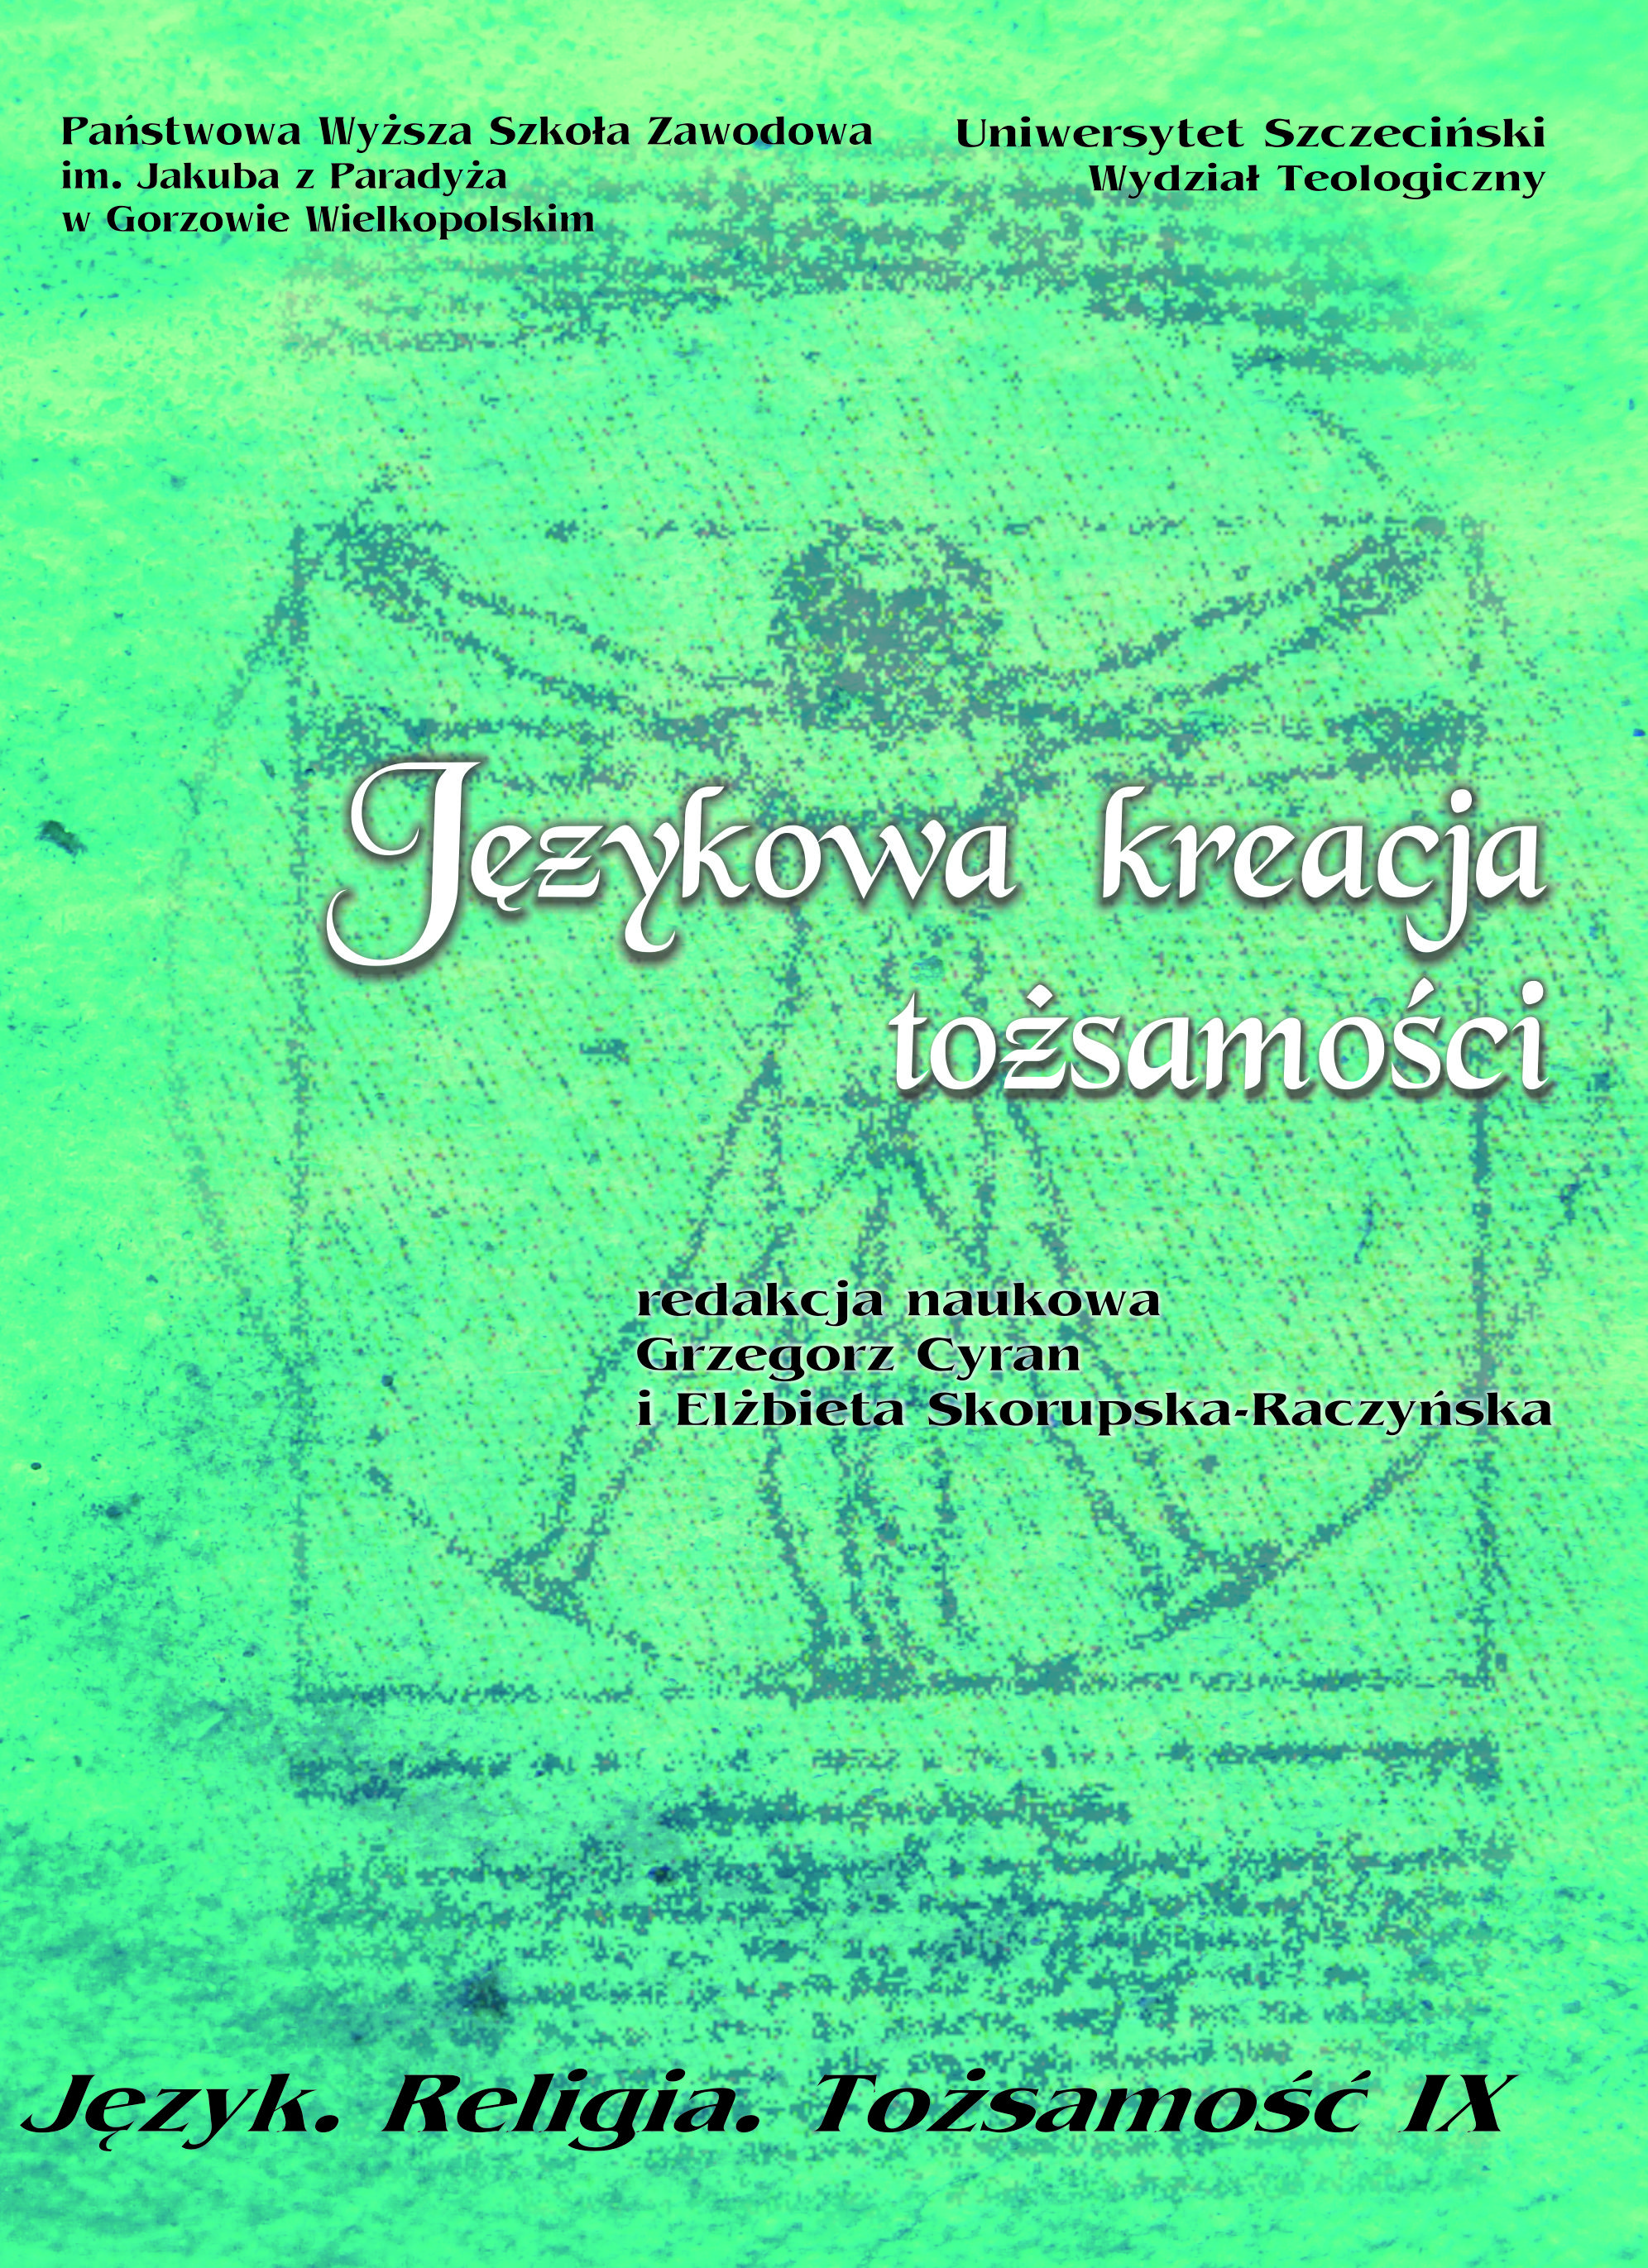 "Remembrance After a Good Mother" by Klementyna Tańska – a linguistic form of the 19th century advice Cover Image